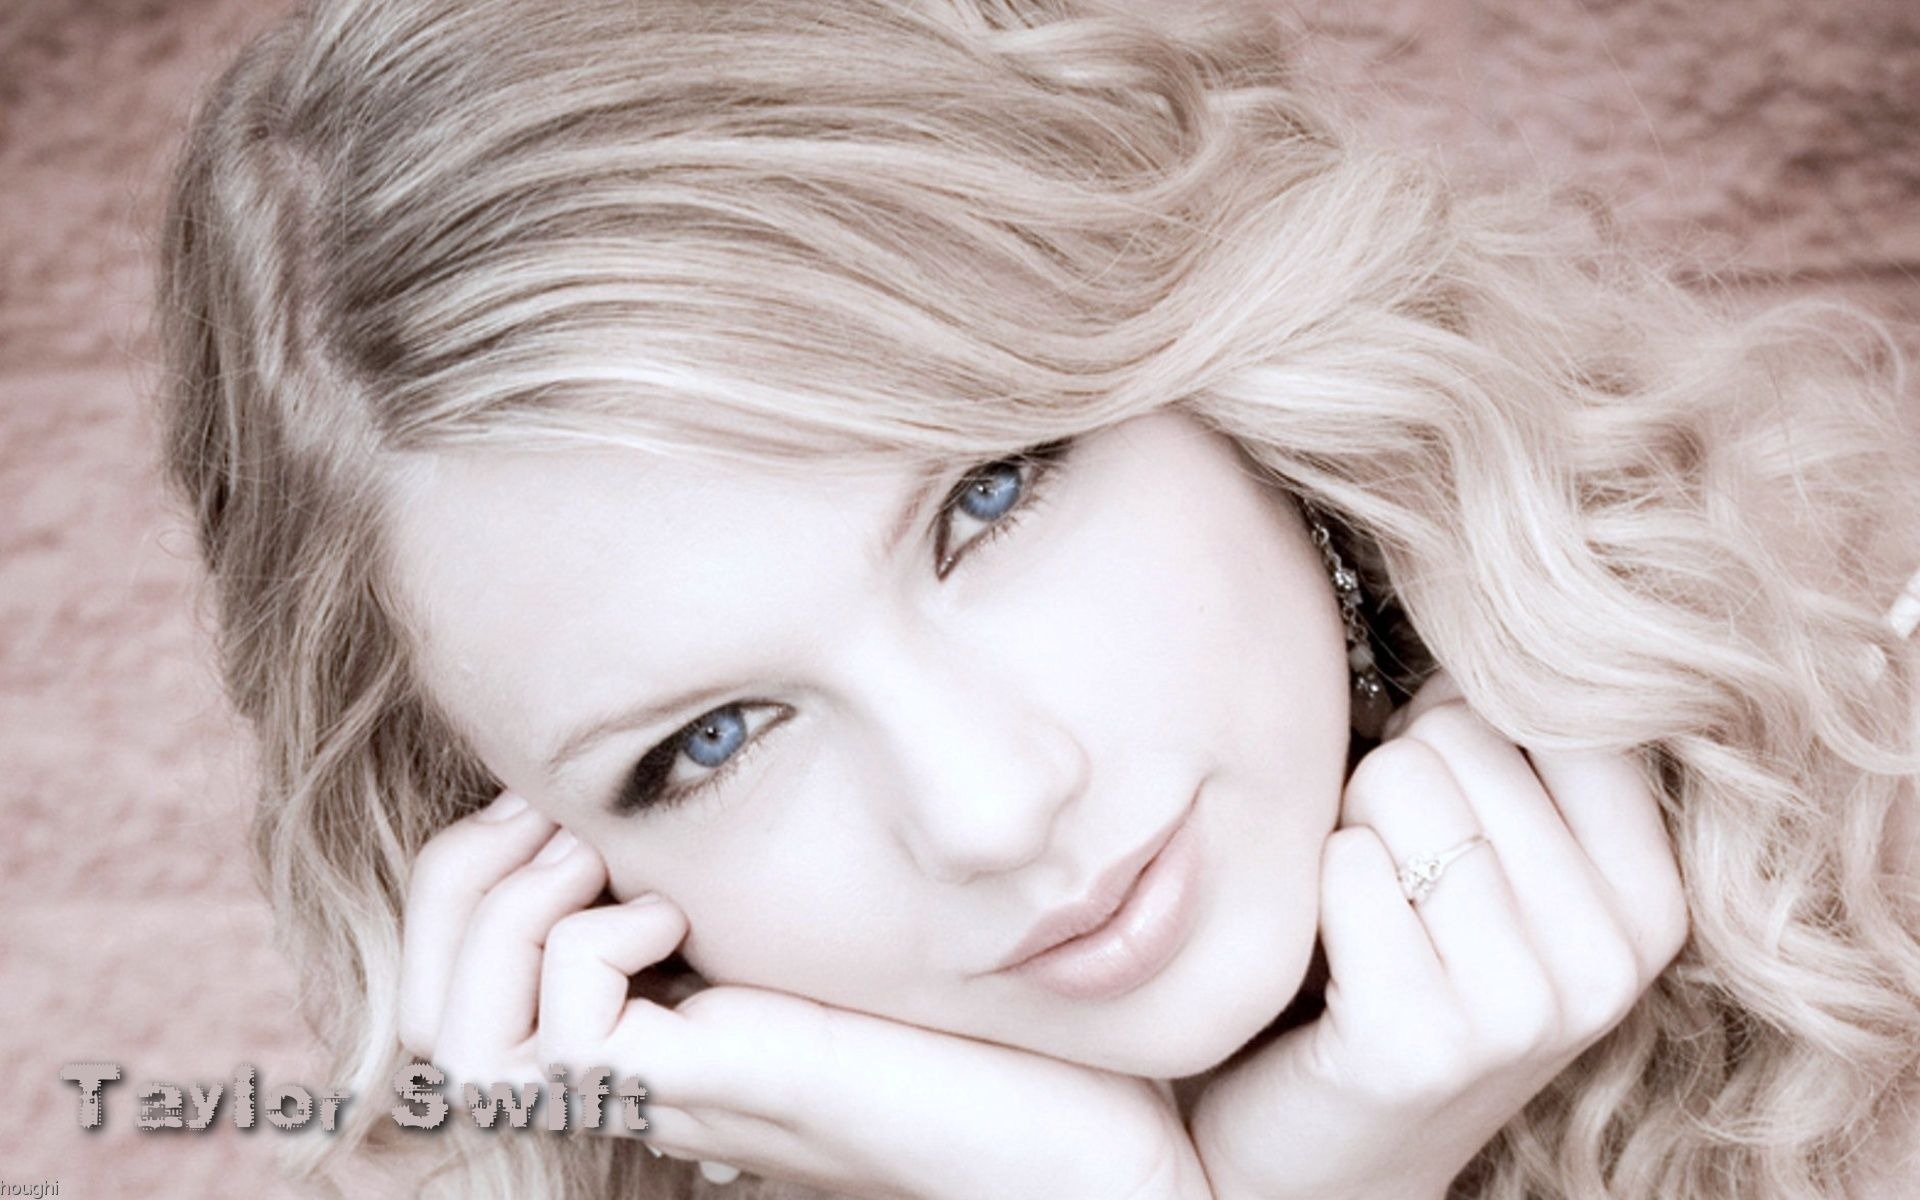 Taylor Swift #045 - 1920x1200 Wallpapers Pictures Photos Images